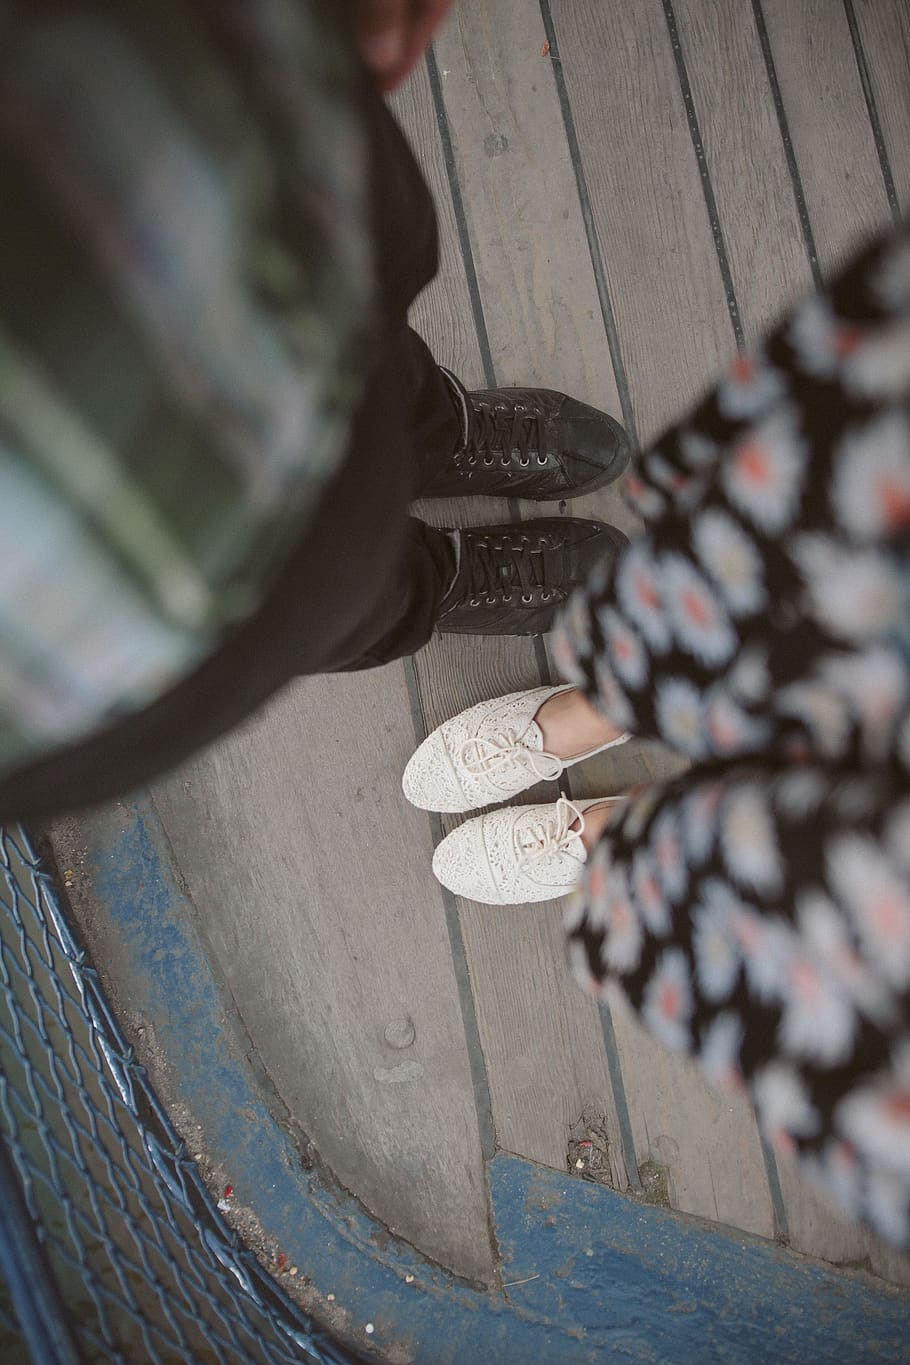 canada, toronto, him, outfit, wood, her, shoes, one person, HD wallpaper